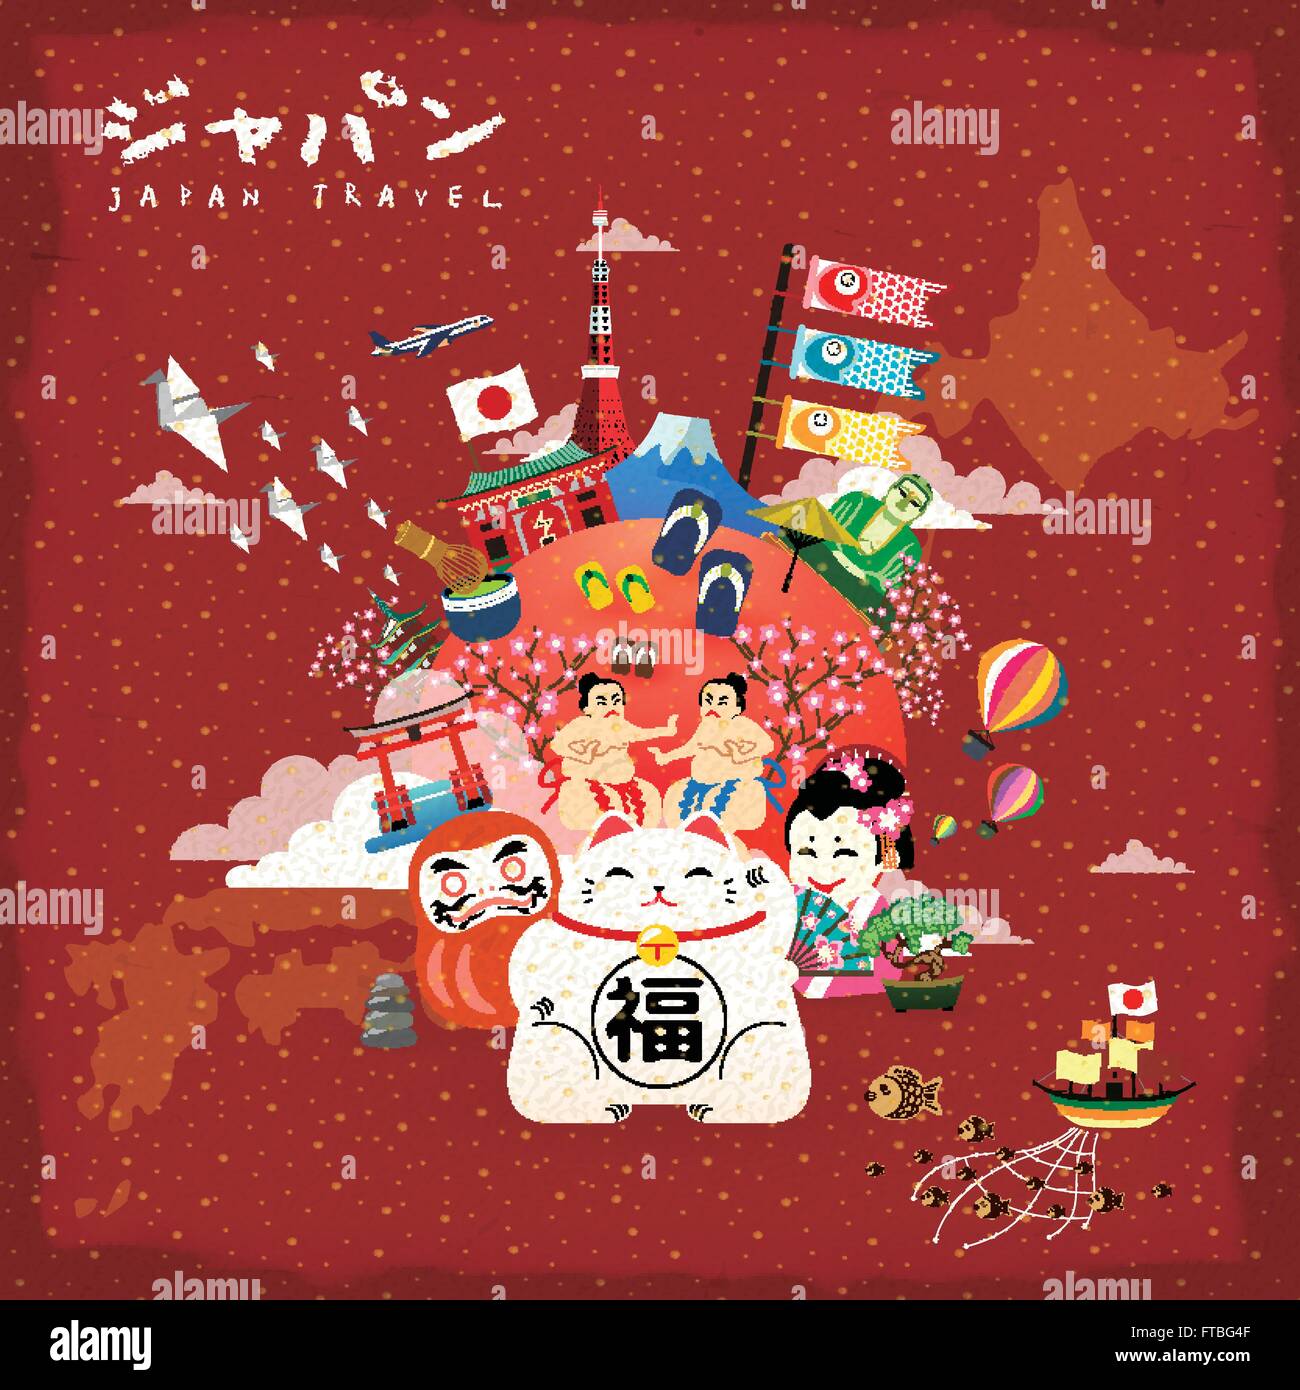 Japan travel poster with famous attractions - Japan in Japanese Stock Vector